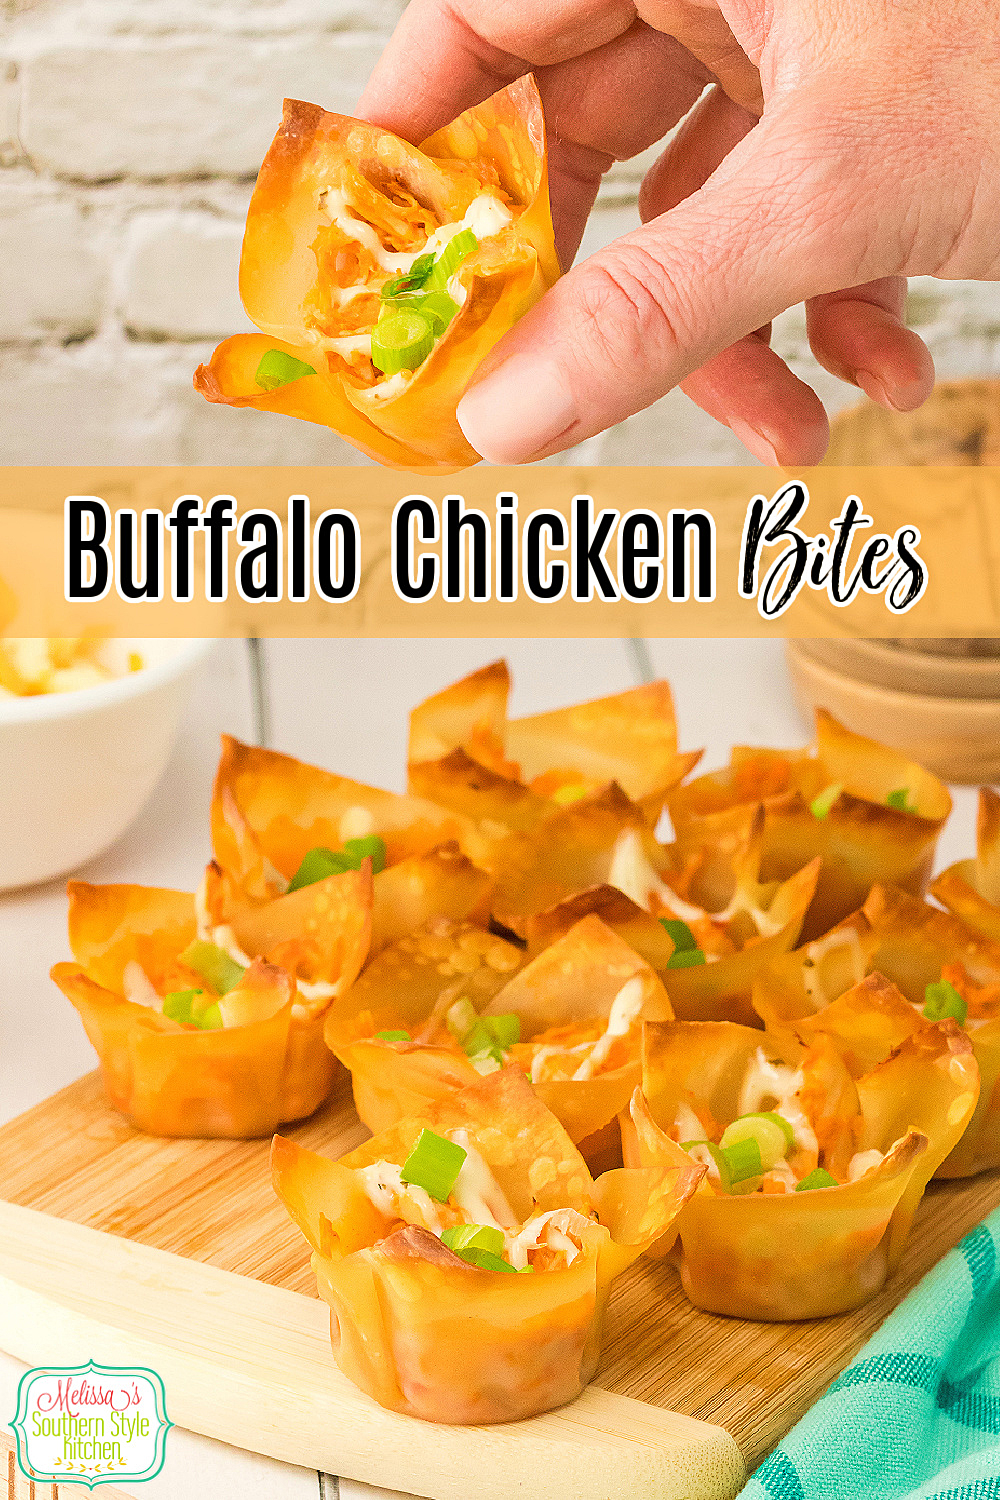 These easy Buffalo Chicken Bites made in wonton cups are a fun appetizer for game day, casual parties and holiday gatherings. #buffalowings #chickenwings #buffalochickenbites #wontons #appetizerrecipes #gaemdayrecipes #chickenrecipes #chickenappetizers #wings